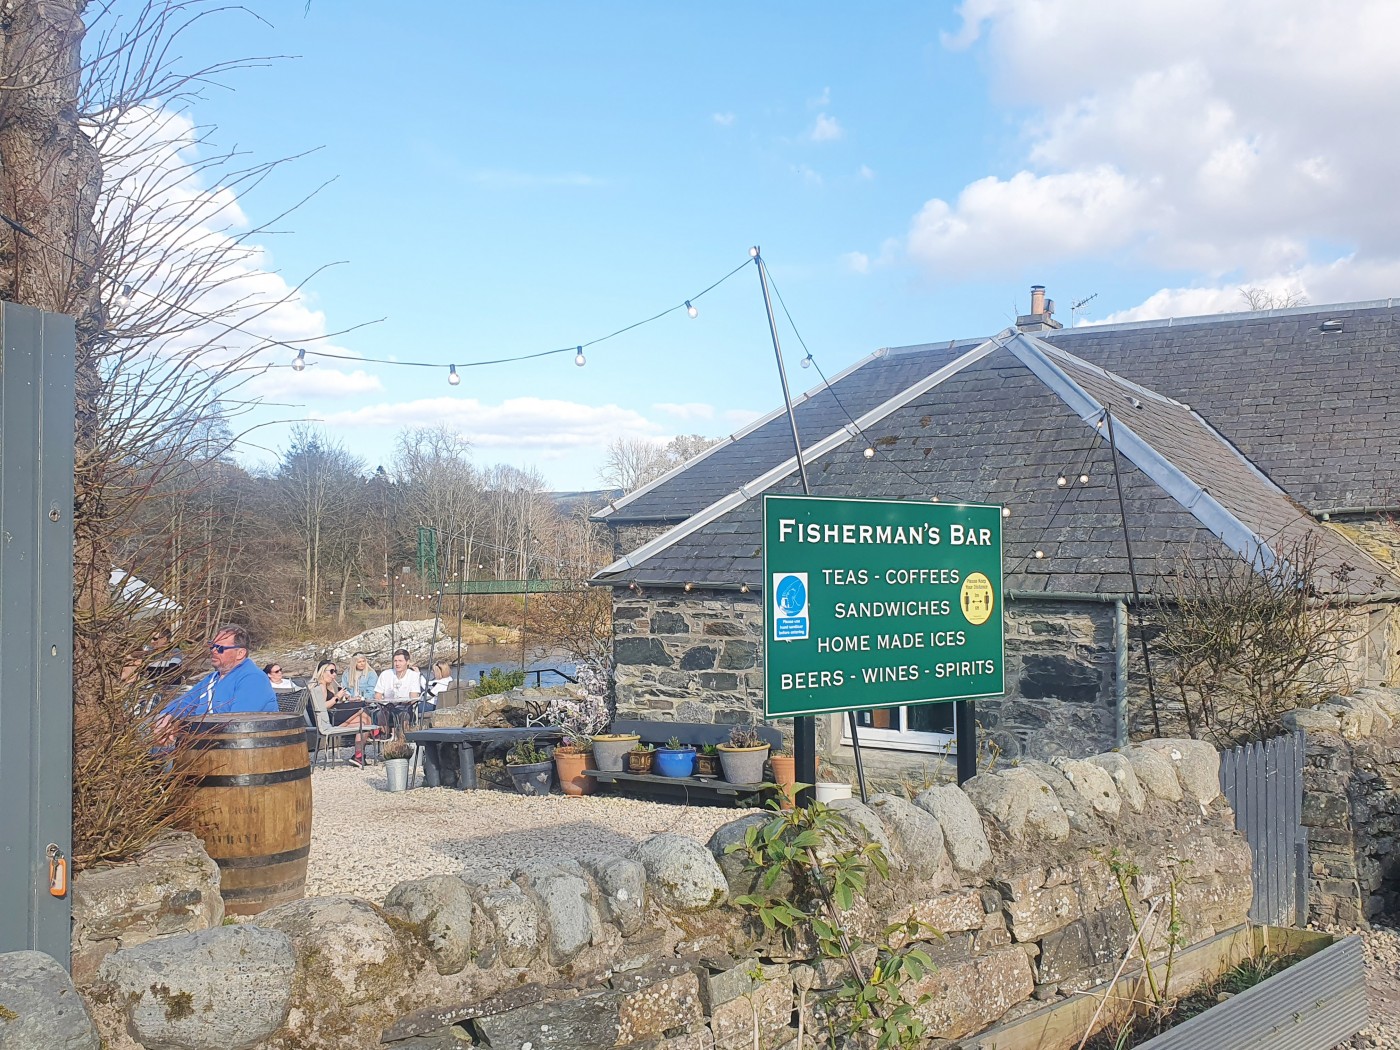 Fishermans Bar, located by Port-na-craig in Pitlochry.